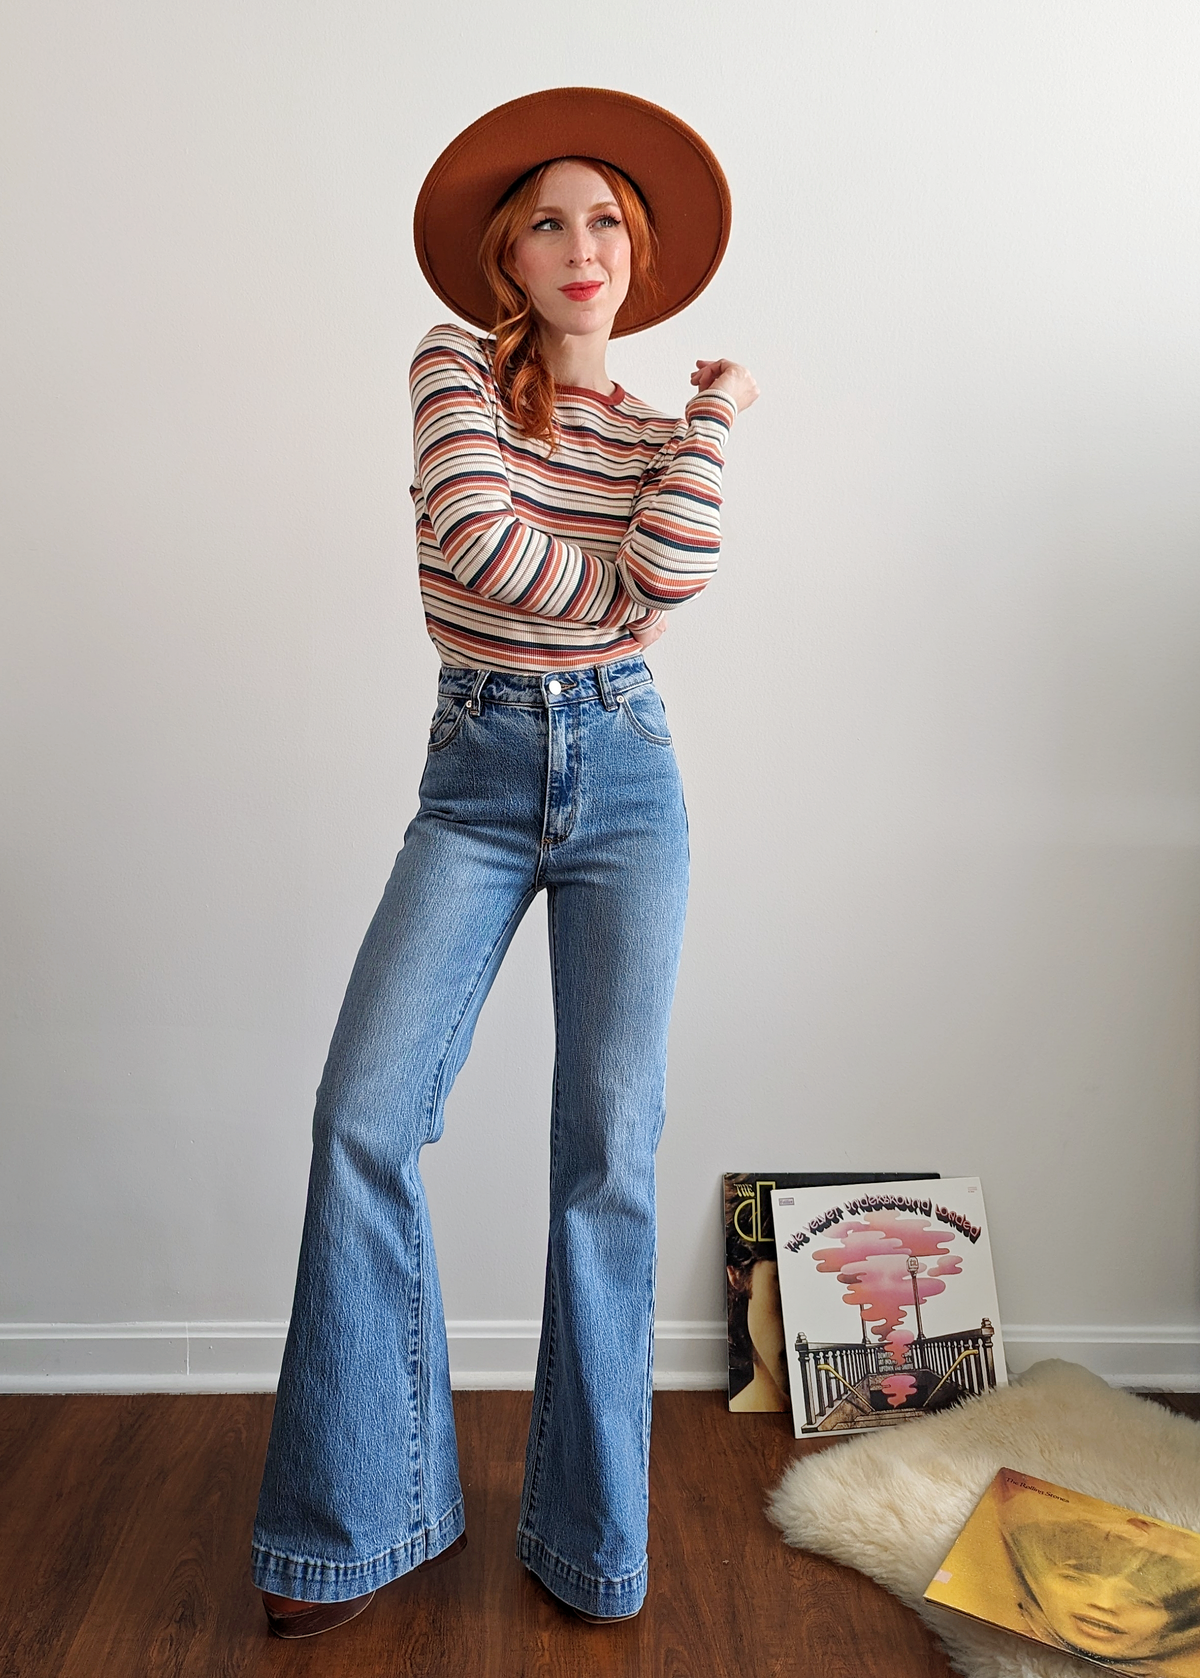 The Rolla's Jeans Salty Blue Denim Eastcoast Flares. 70s inspired bell bottom jeans with a high rise waist and faded blue denim wash. Organic Cotton!